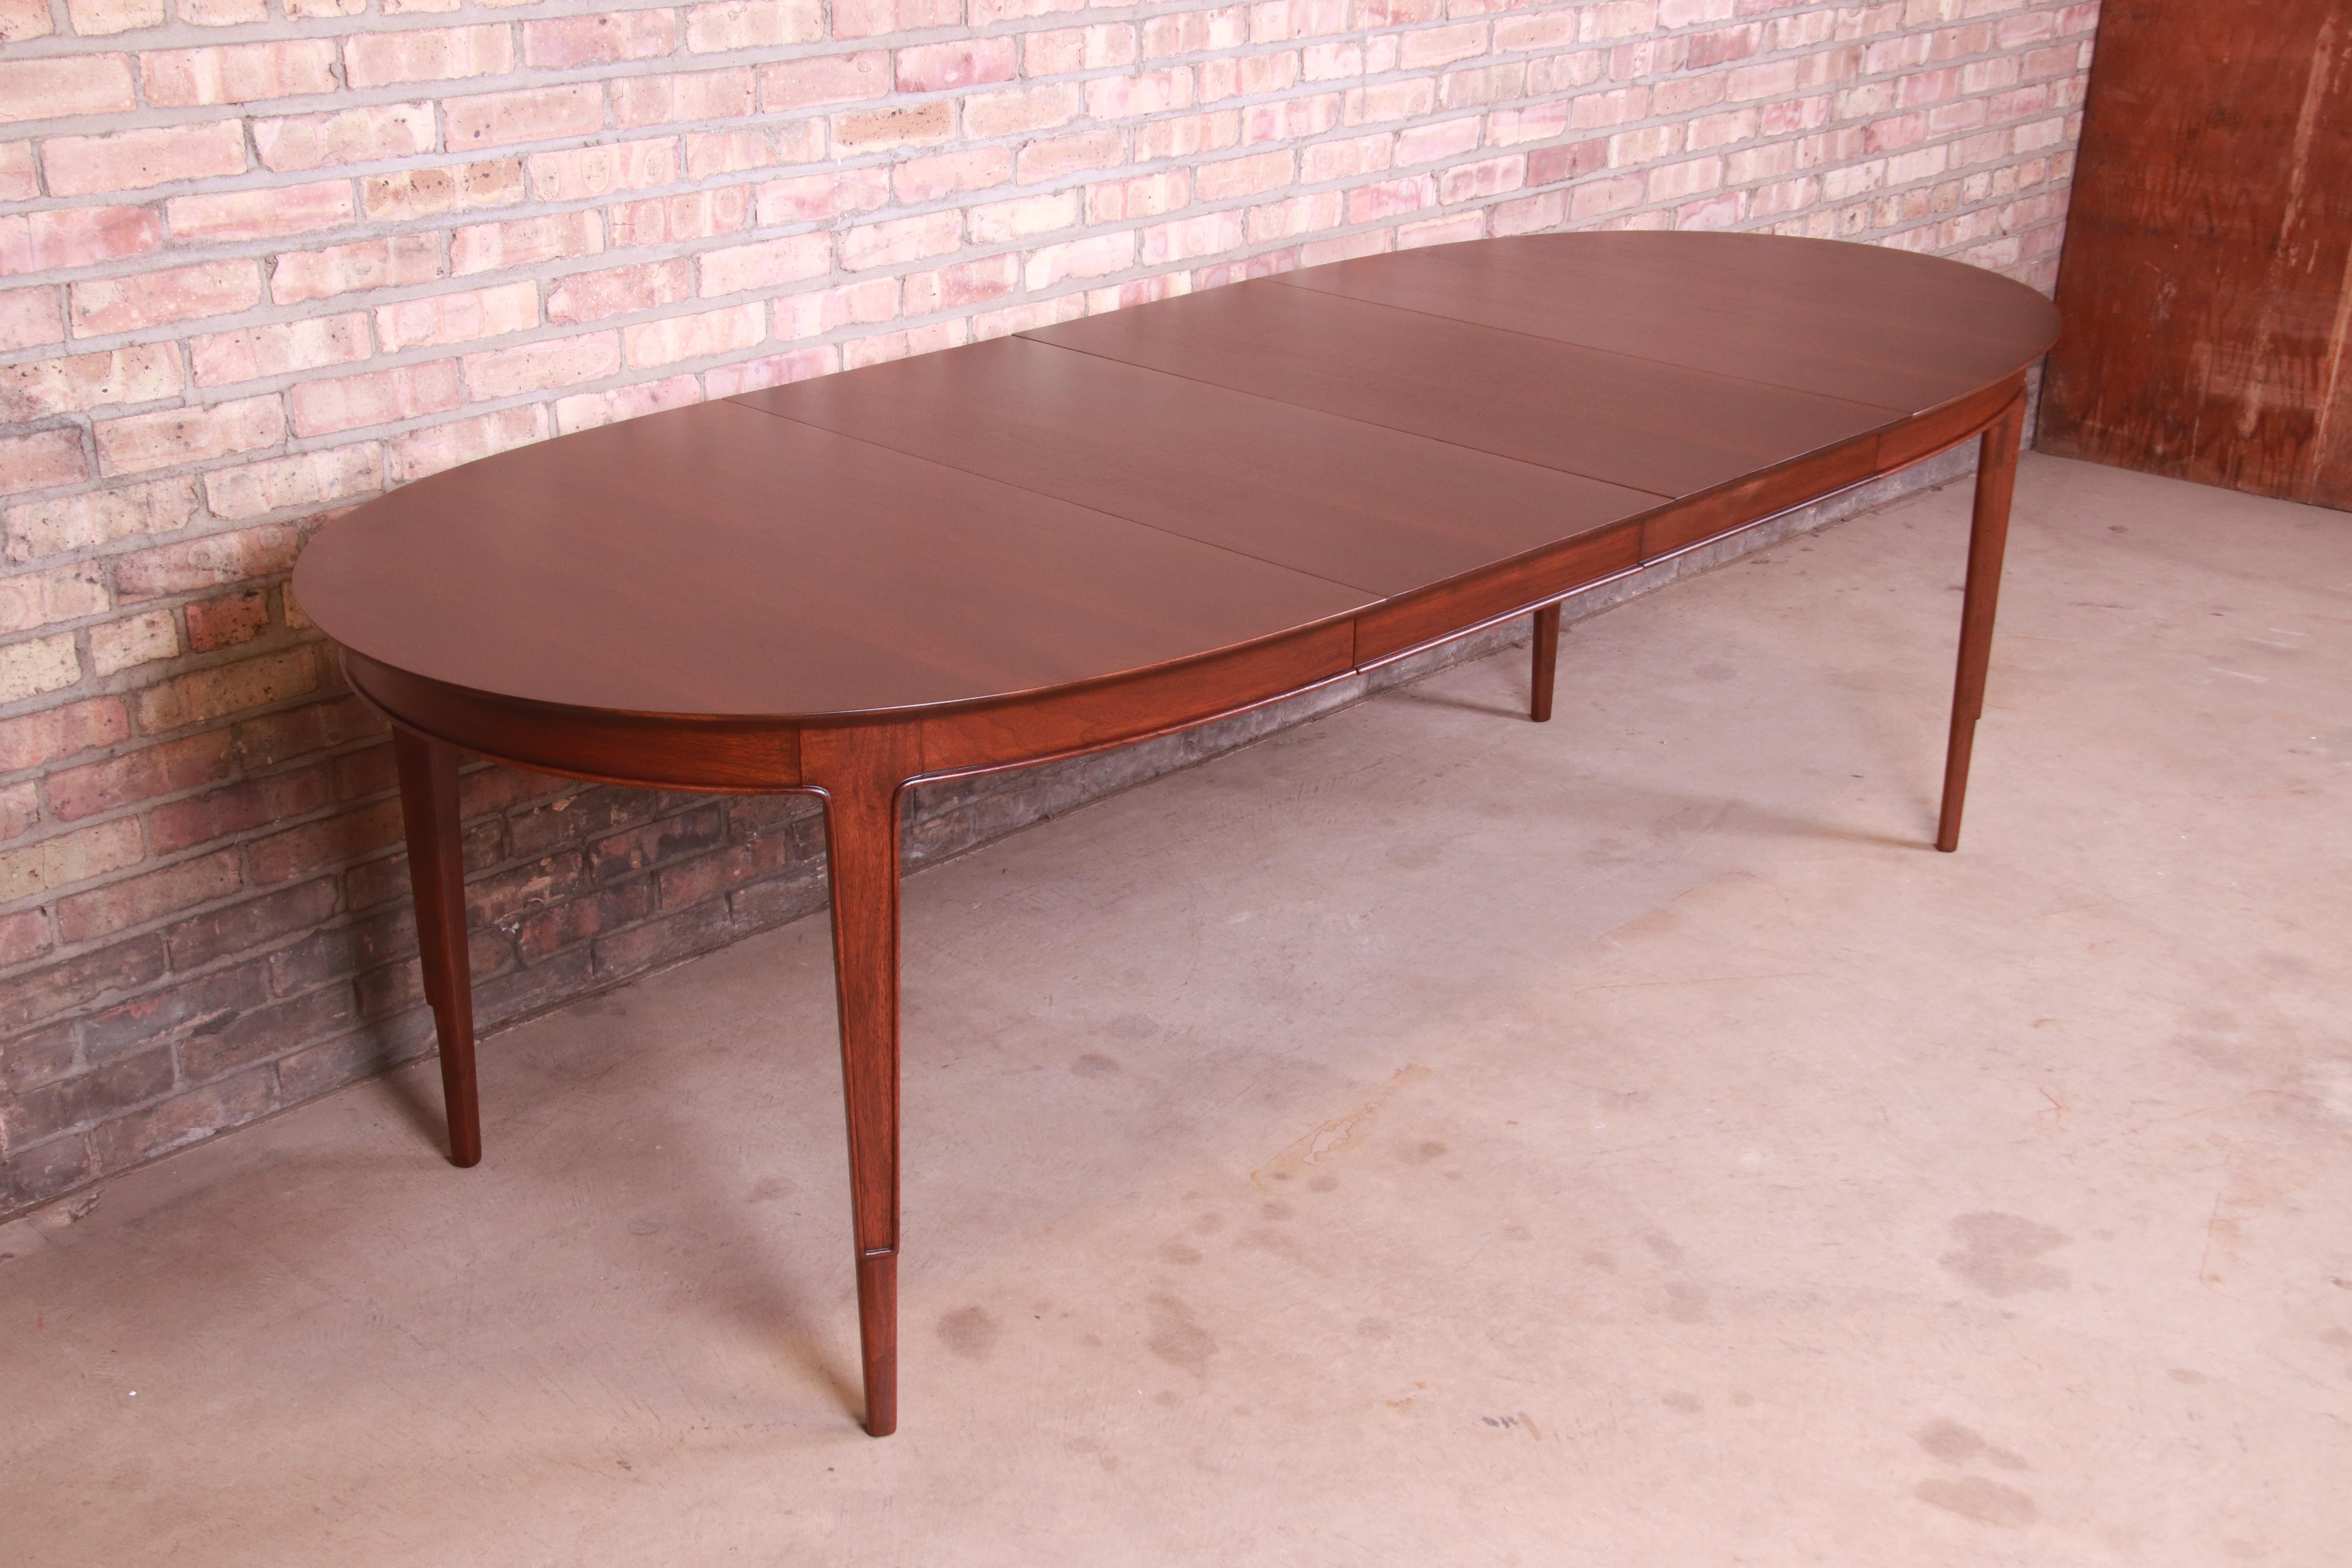 20th Century John Stuart Janus Collection Sculpted Walnut Dining Table, Newly Refinished